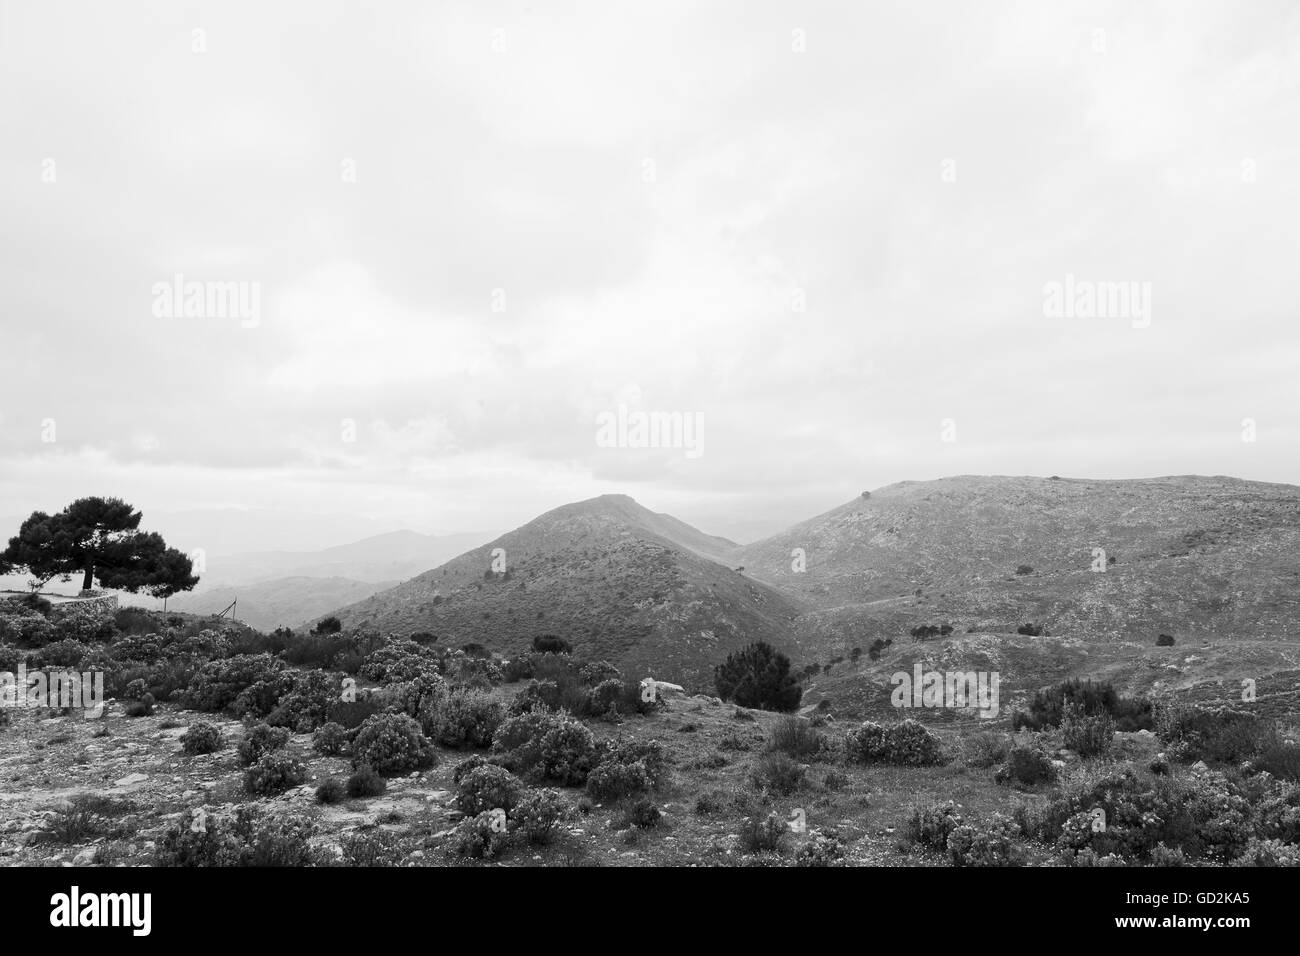 Marbella landscape Black and White Stock Photos & Images - Alamy